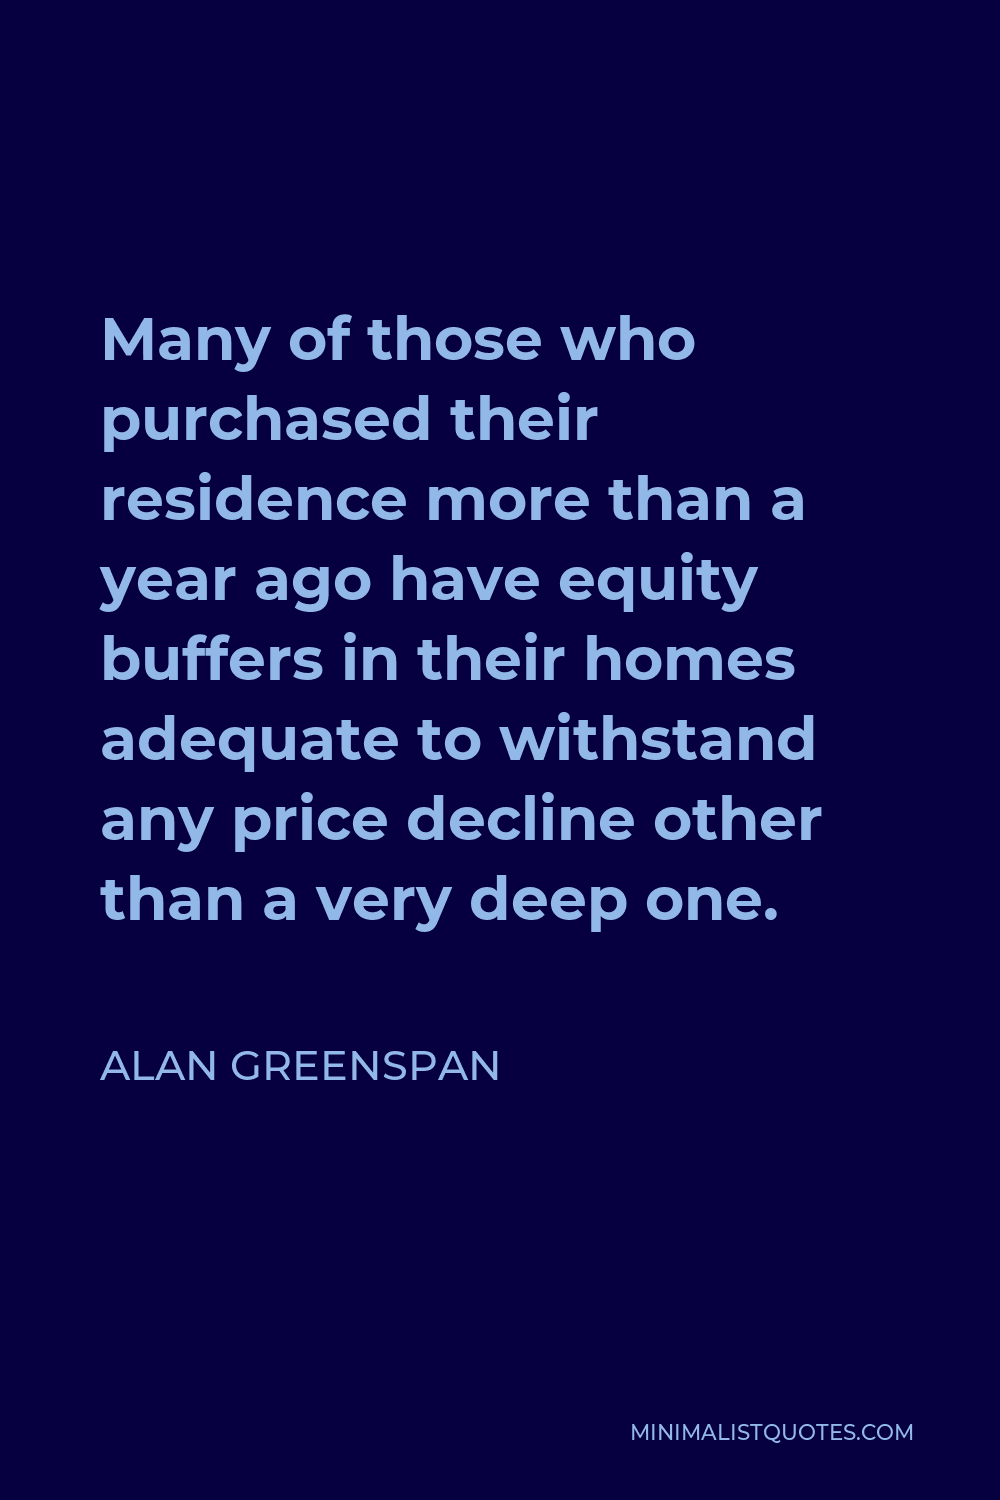 Alan Greenspan Quote - Many of those who purchased their residence more than a year ago have equity buffers in their homes adequate to withstand any price decline other than a very deep one.